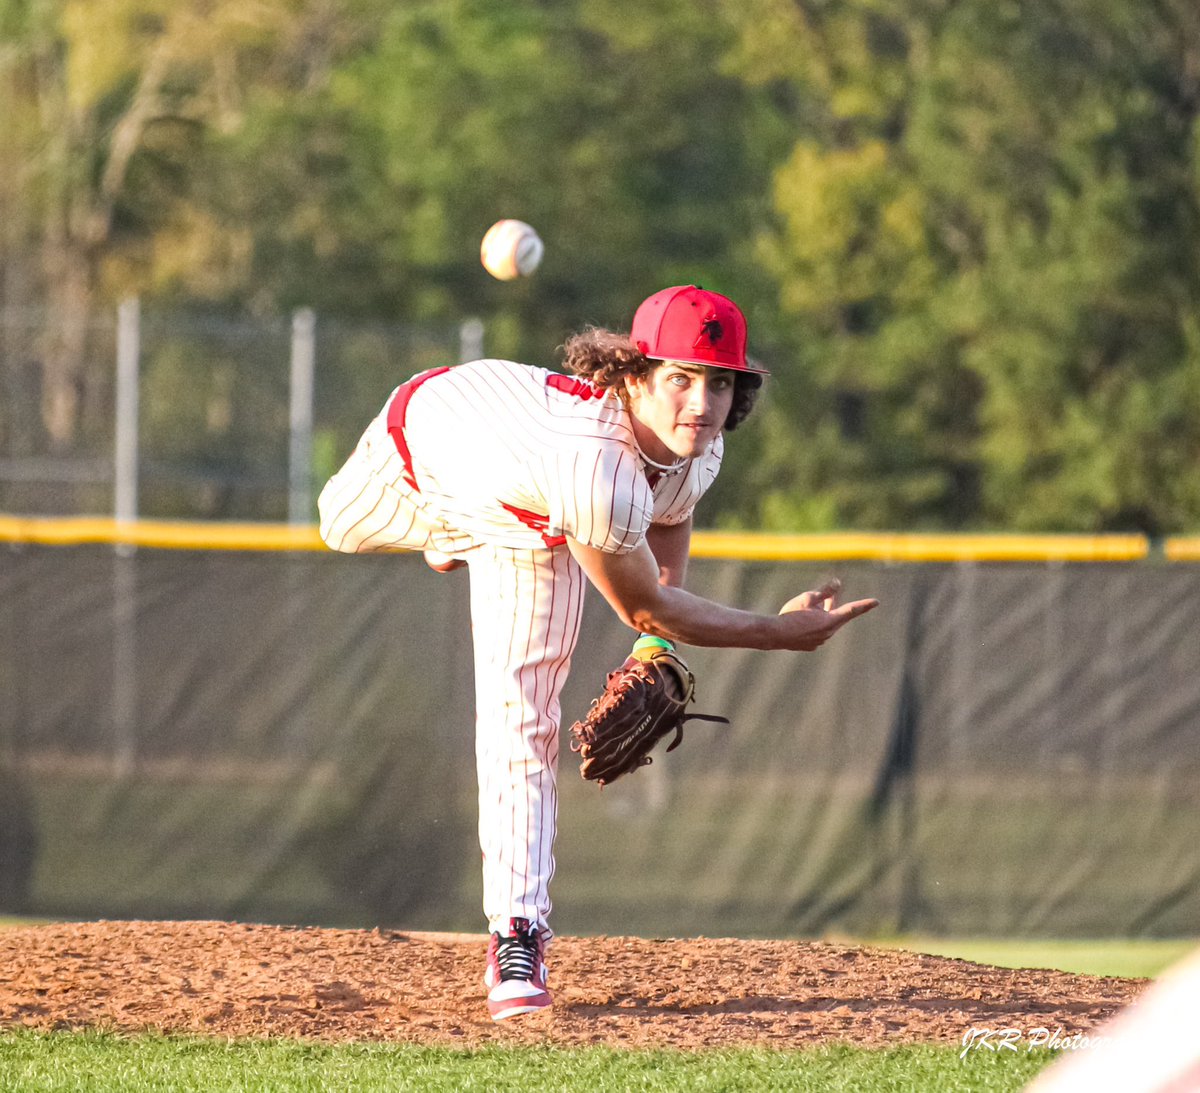 Warriors notch another win tonight over Thomas dale 3-2. Highlights: @LucasEdwards25 2 hits @Jacob_lee05 2run HR Pitching held it down! @c_valerio2024 4.1ip 4 hits 2 R and 6 Ks @hayden_black2 2.2ip 0 hits 0 R 5 Ks and gets the win! #WarriorPride @CoachStoots @A_MooreTheCoach